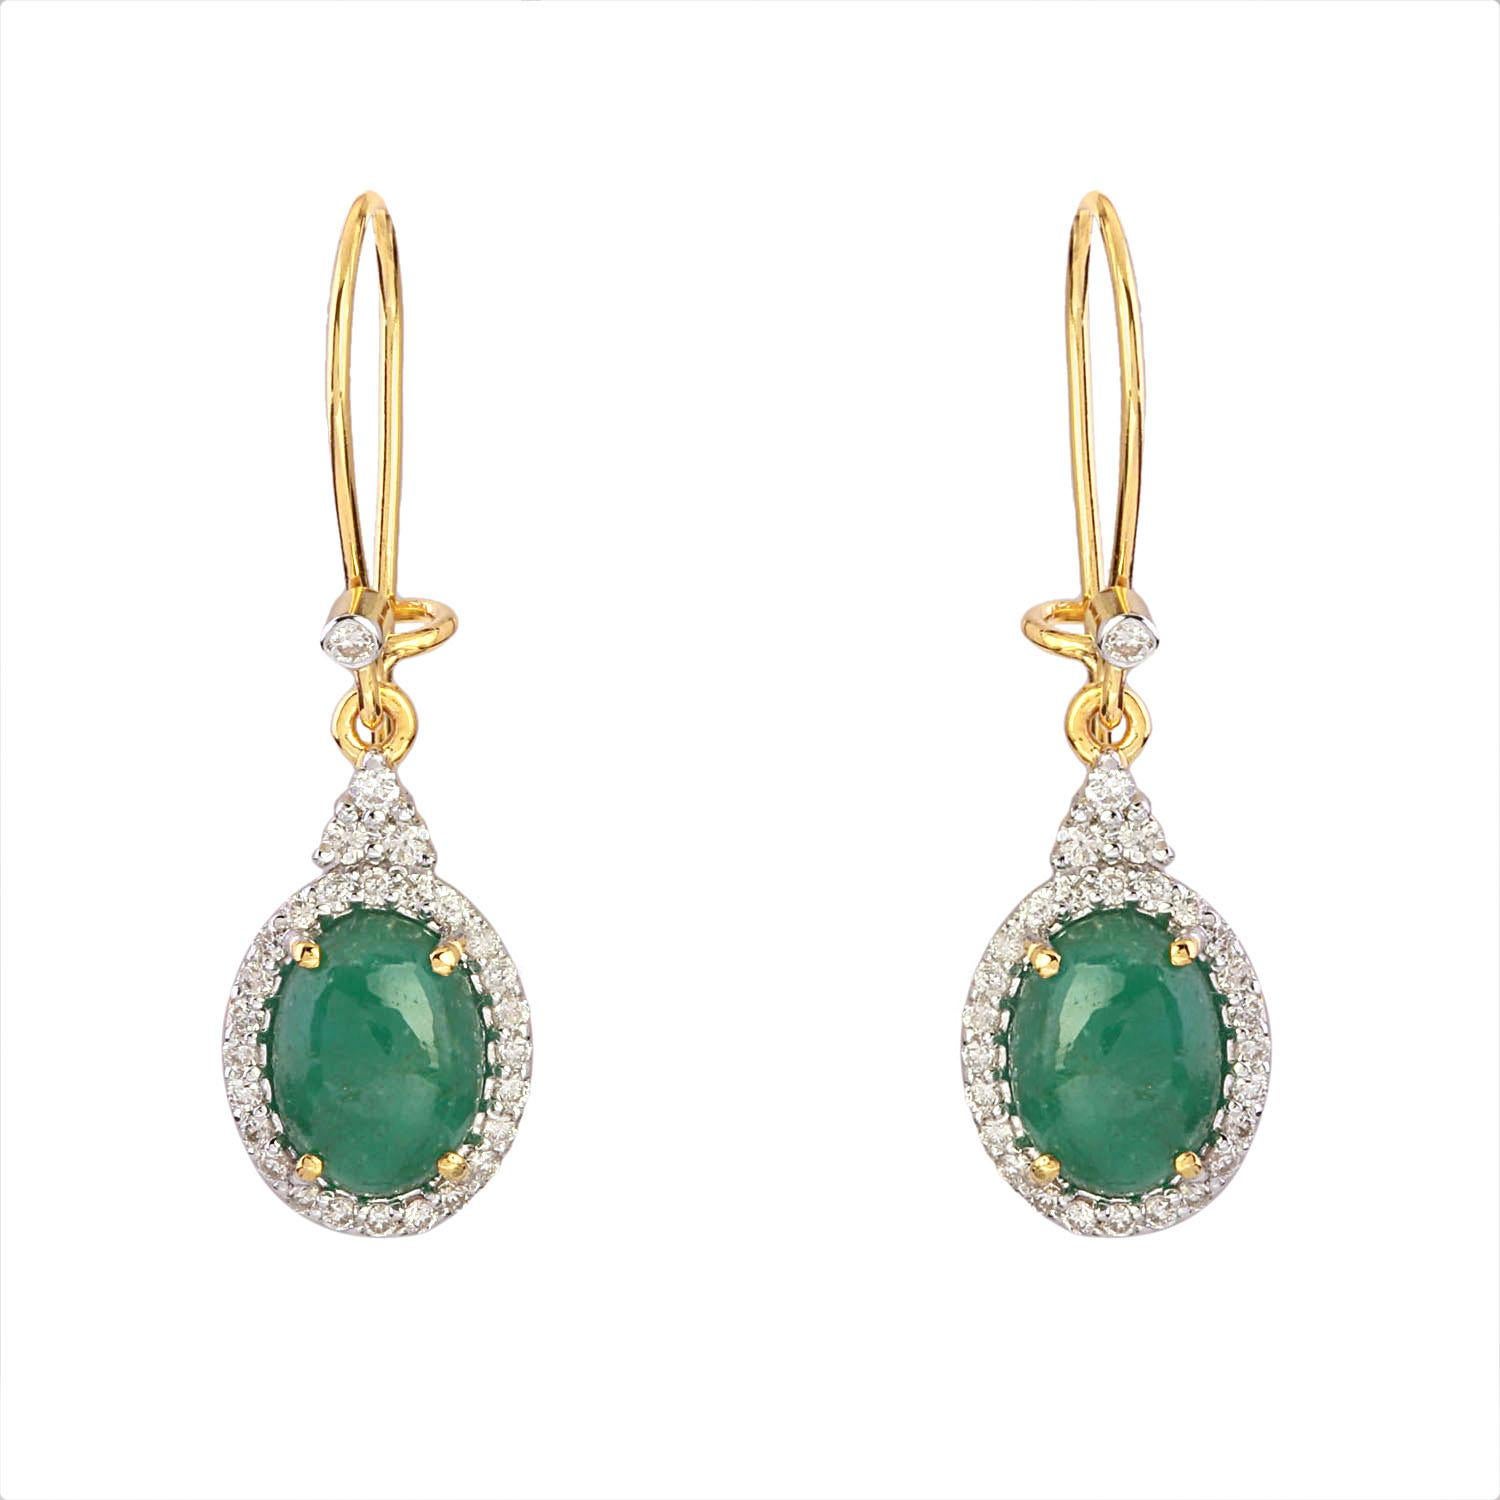 Feast your eyes on these vivid Emerald Gemstone Hook Earrings encircled by 0.38 Carat Natural Diamonds. The hook and suspension are made with pure 14K Yellow Gold. Pair yours with everything – these wonders can take you through day and night